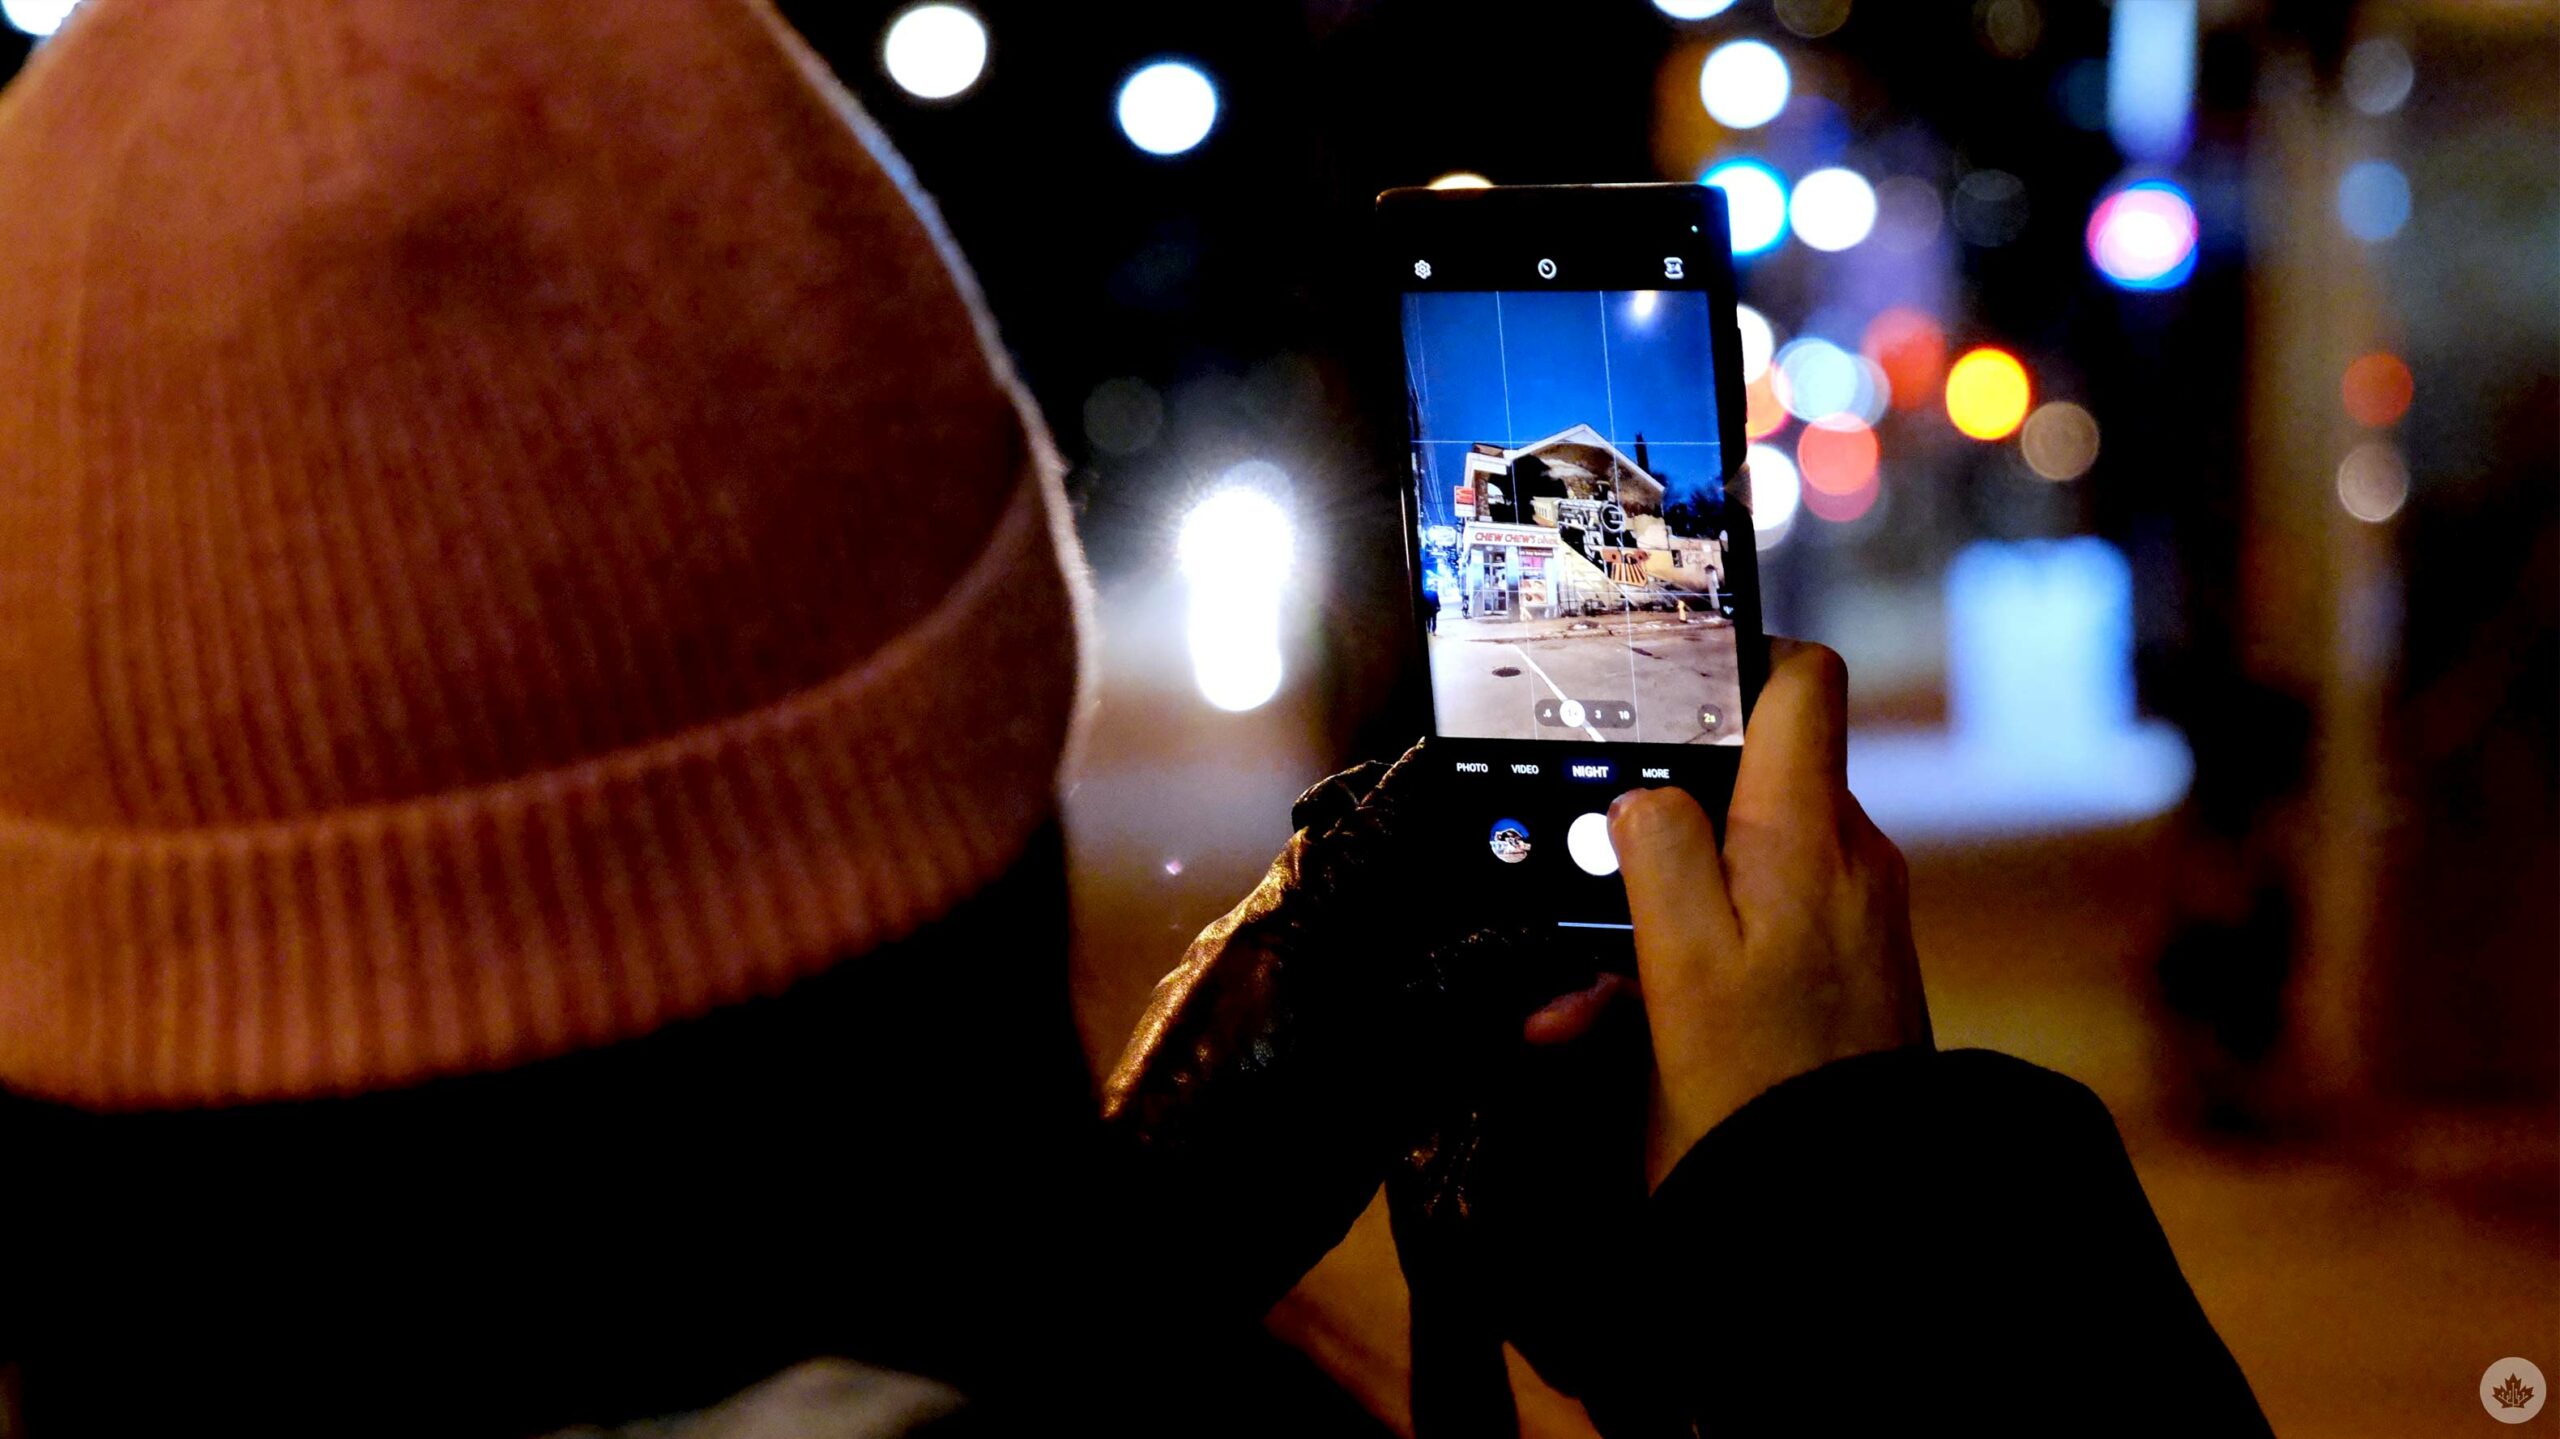 Samsung Galaxy S22 Ultra Nightography — what the heck is it?